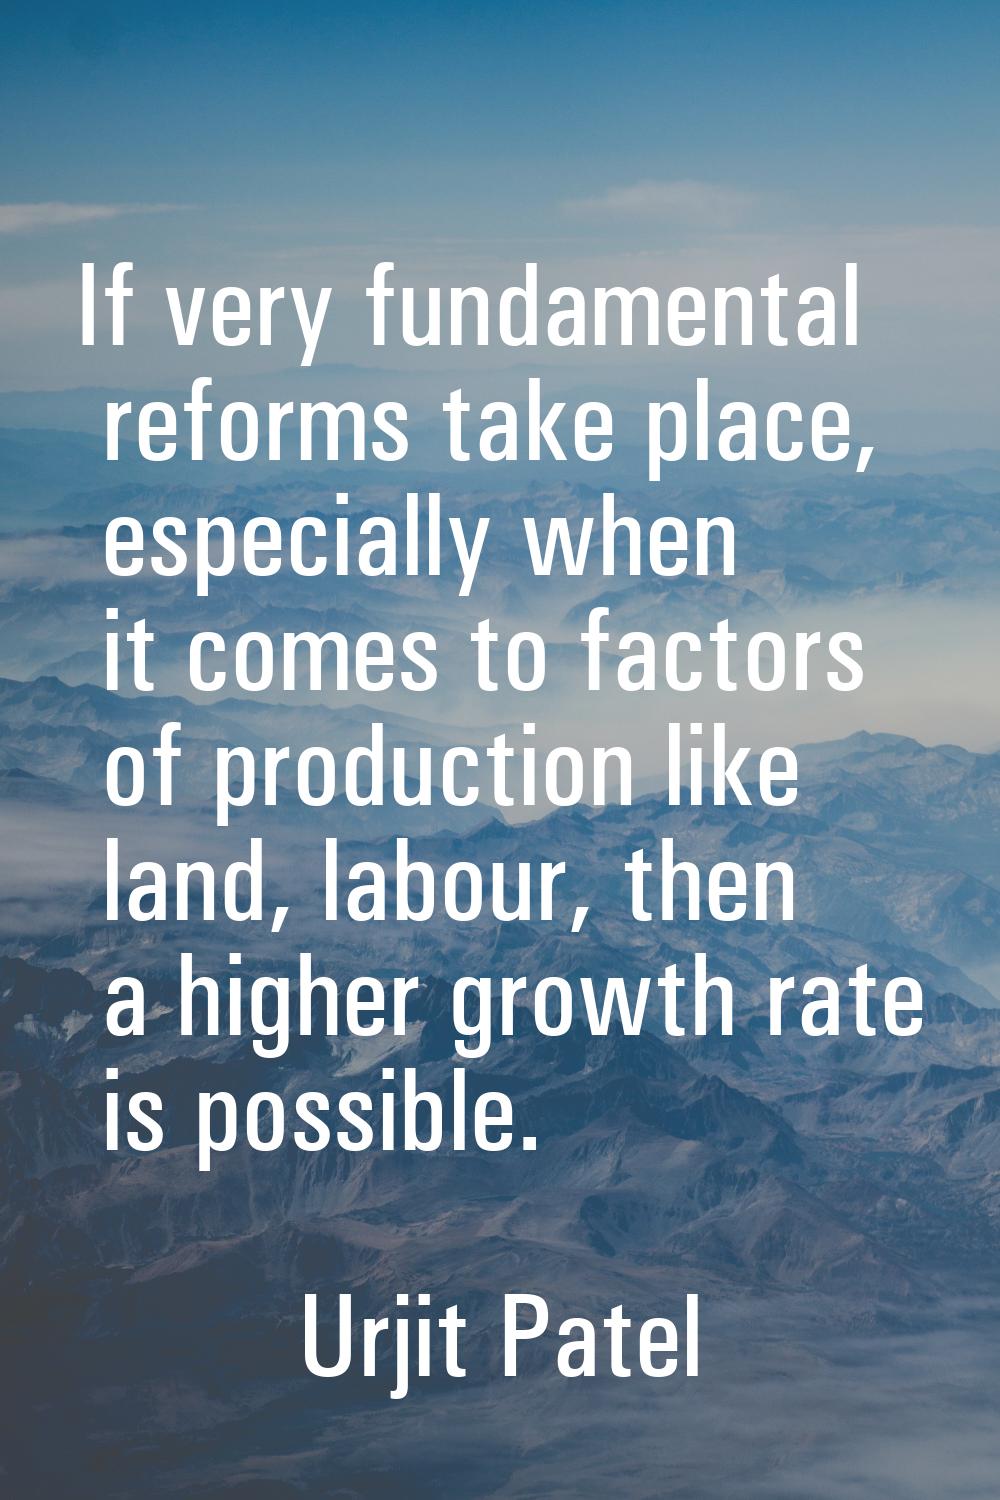 If very fundamental reforms take place, especially when it comes to factors of production like land